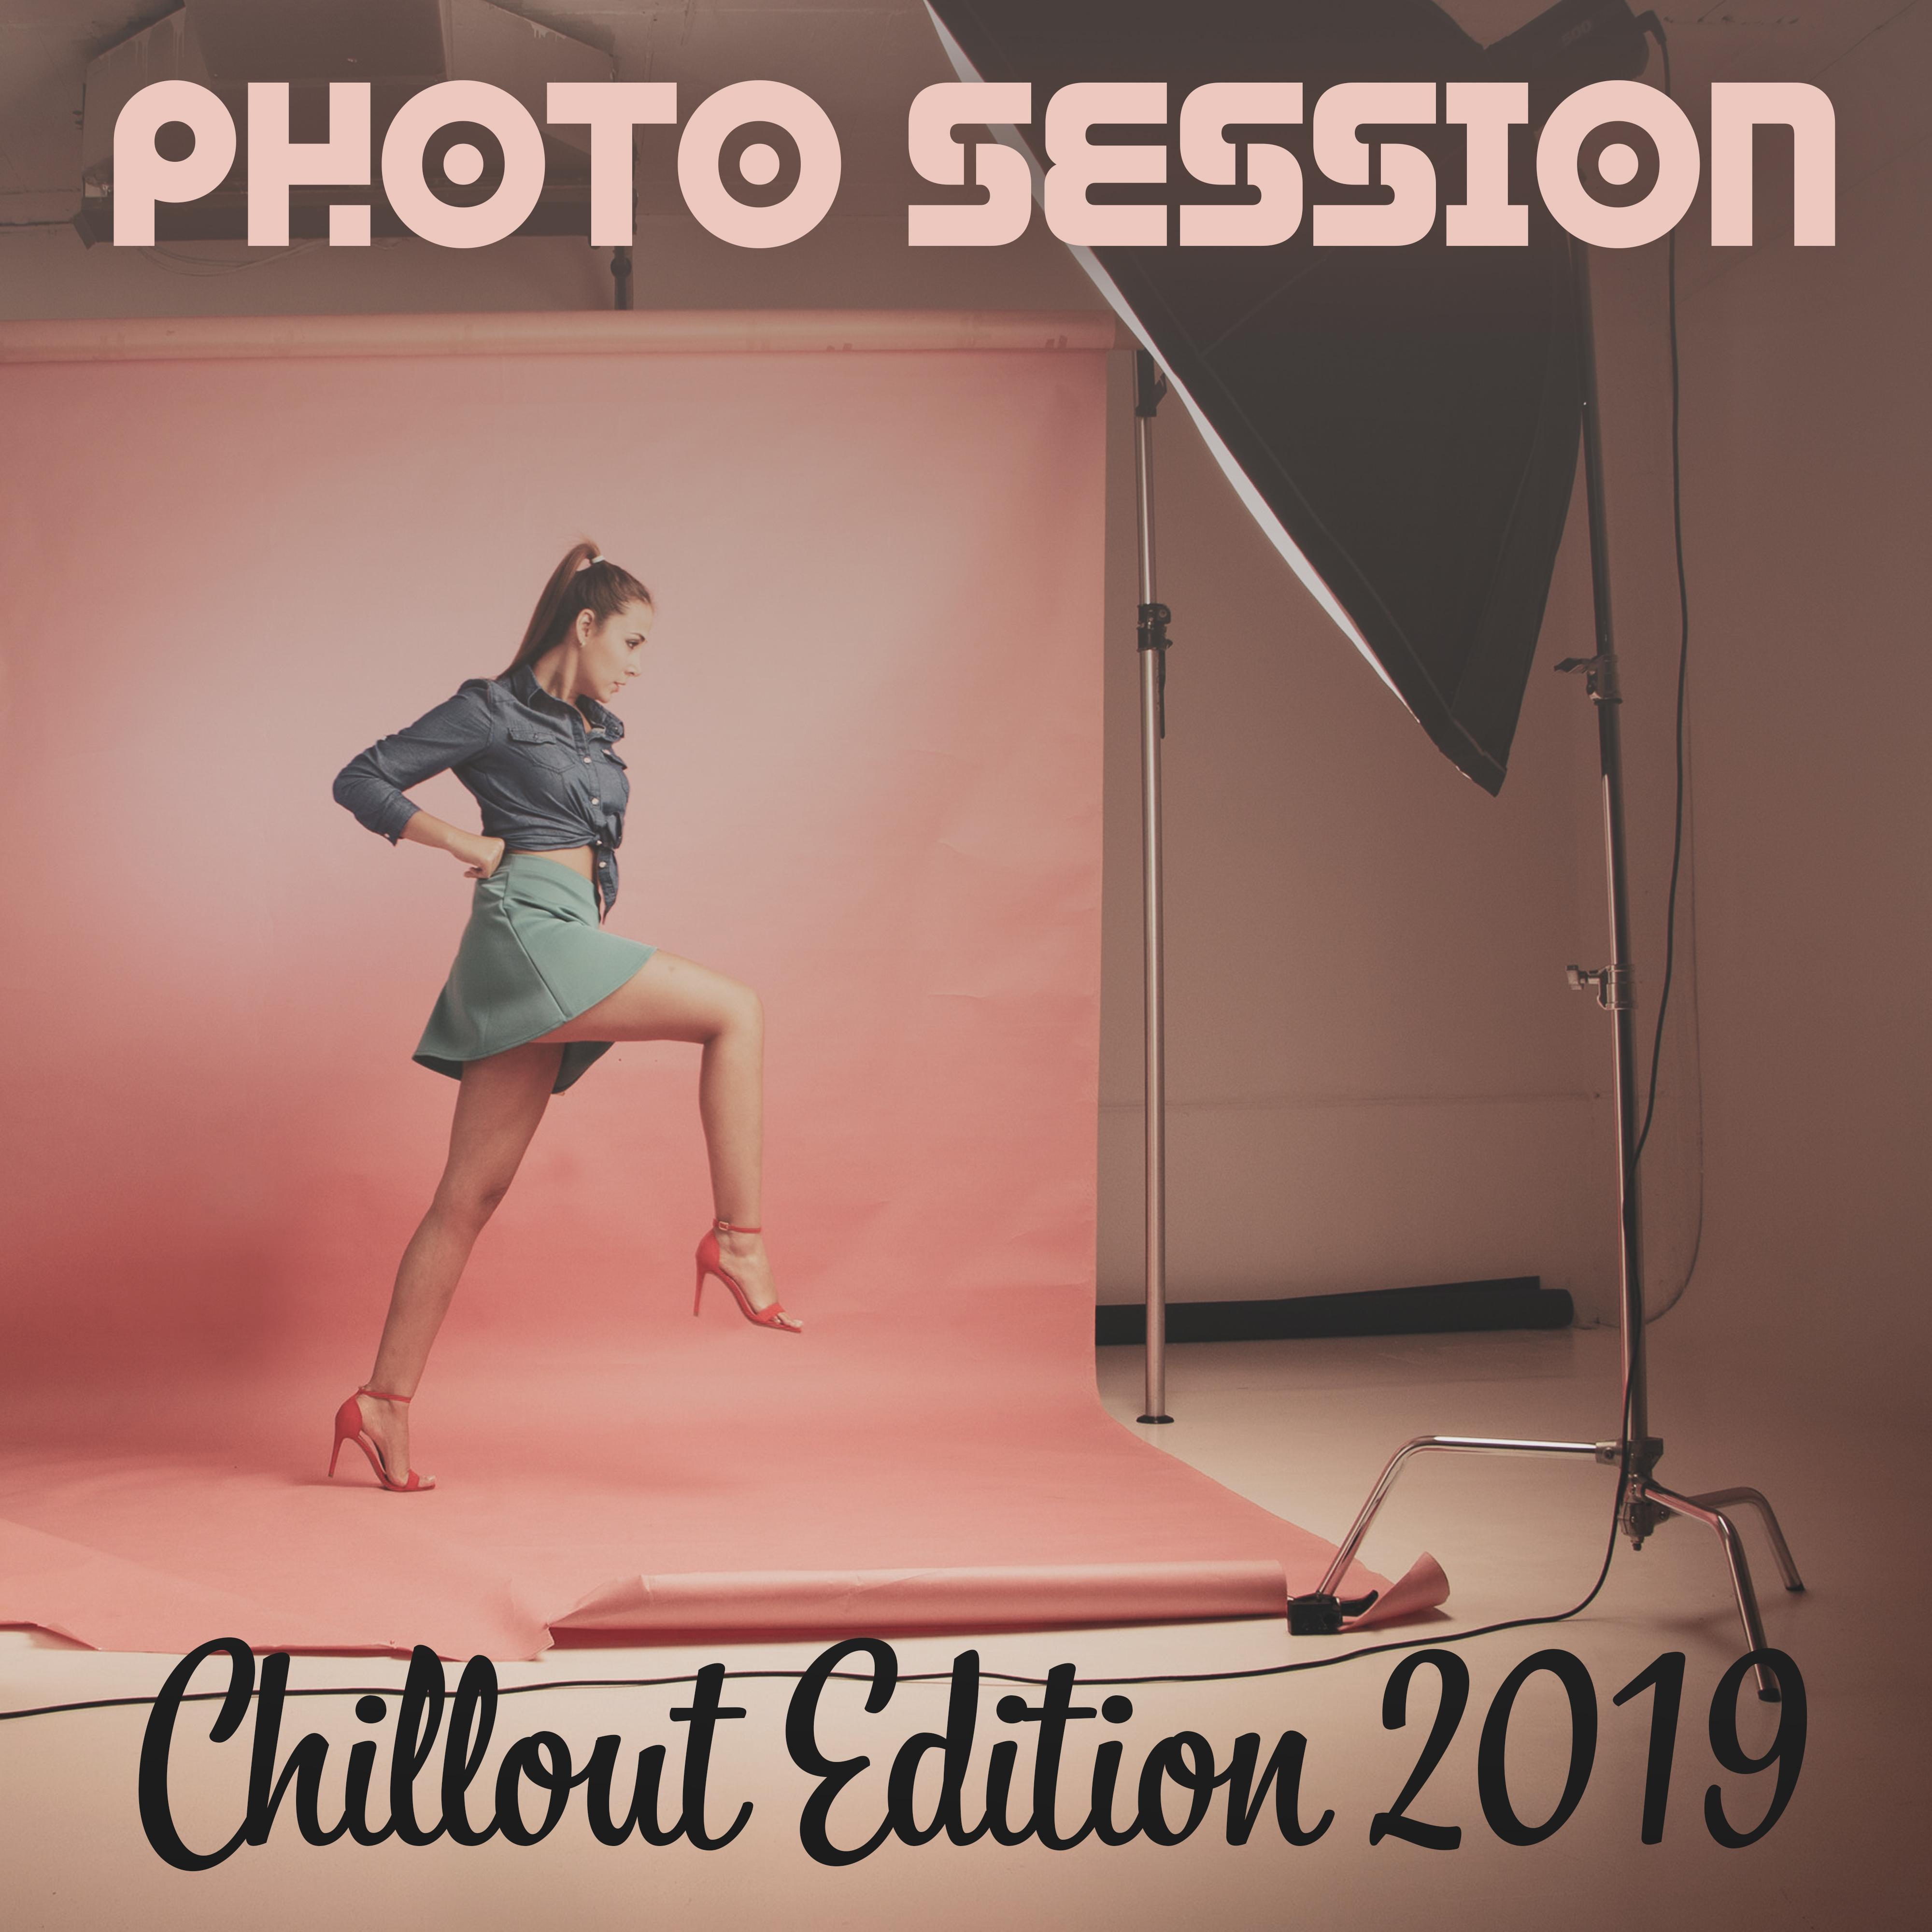 Photo Session  Chillout Edition 2019